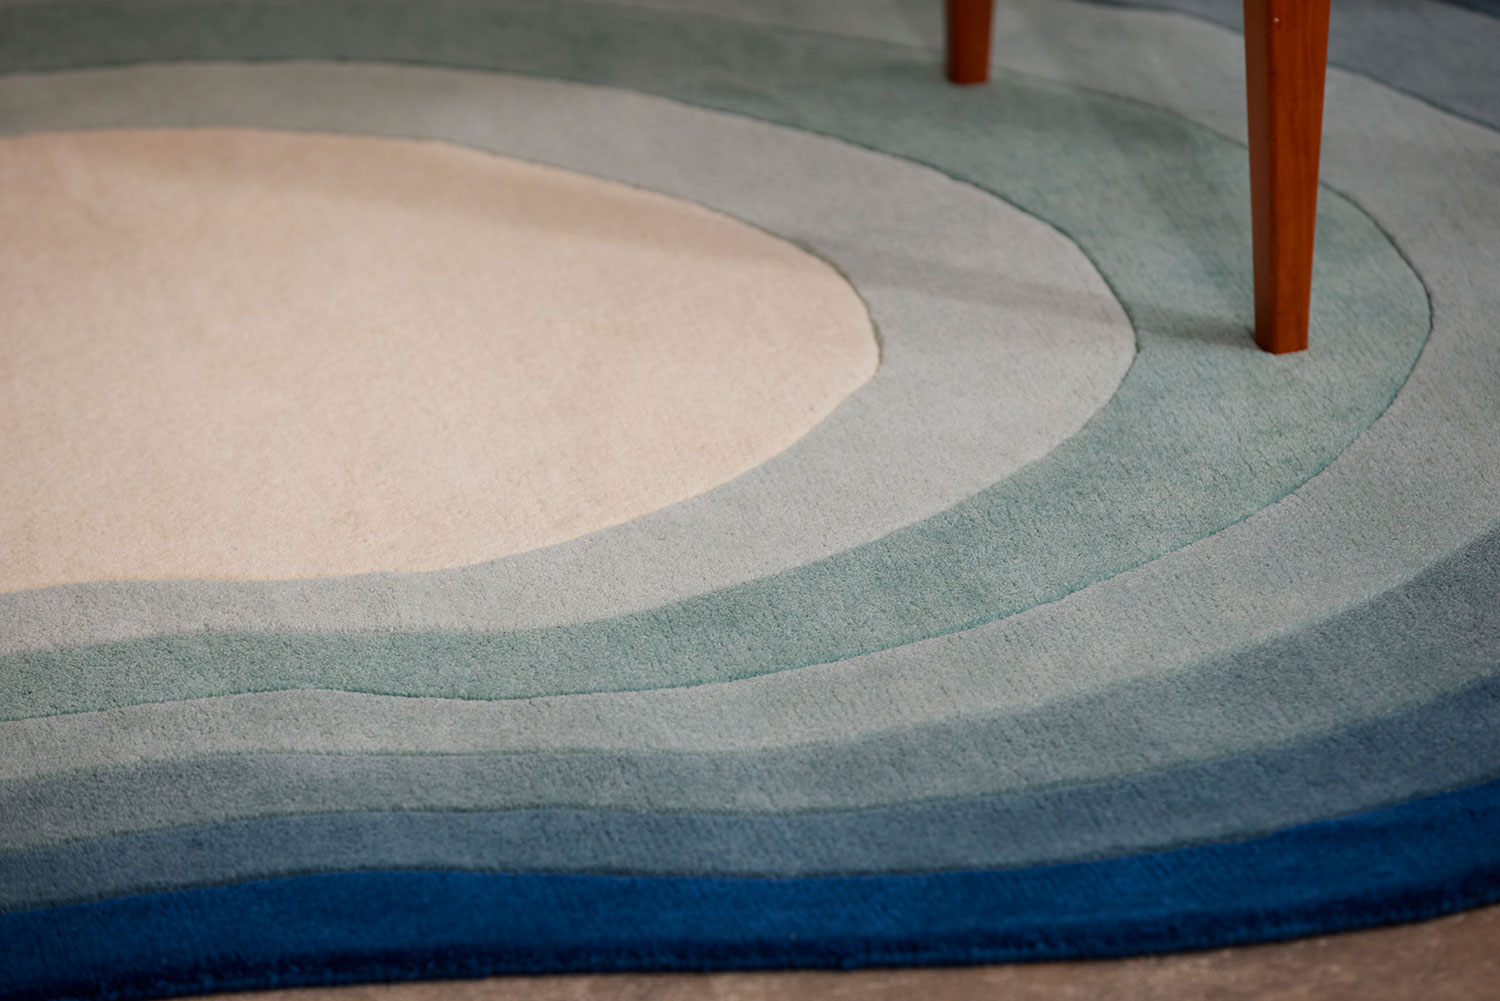 A close up of the edge of a blue gradient area rug called Pool Dream in the shape of a pool